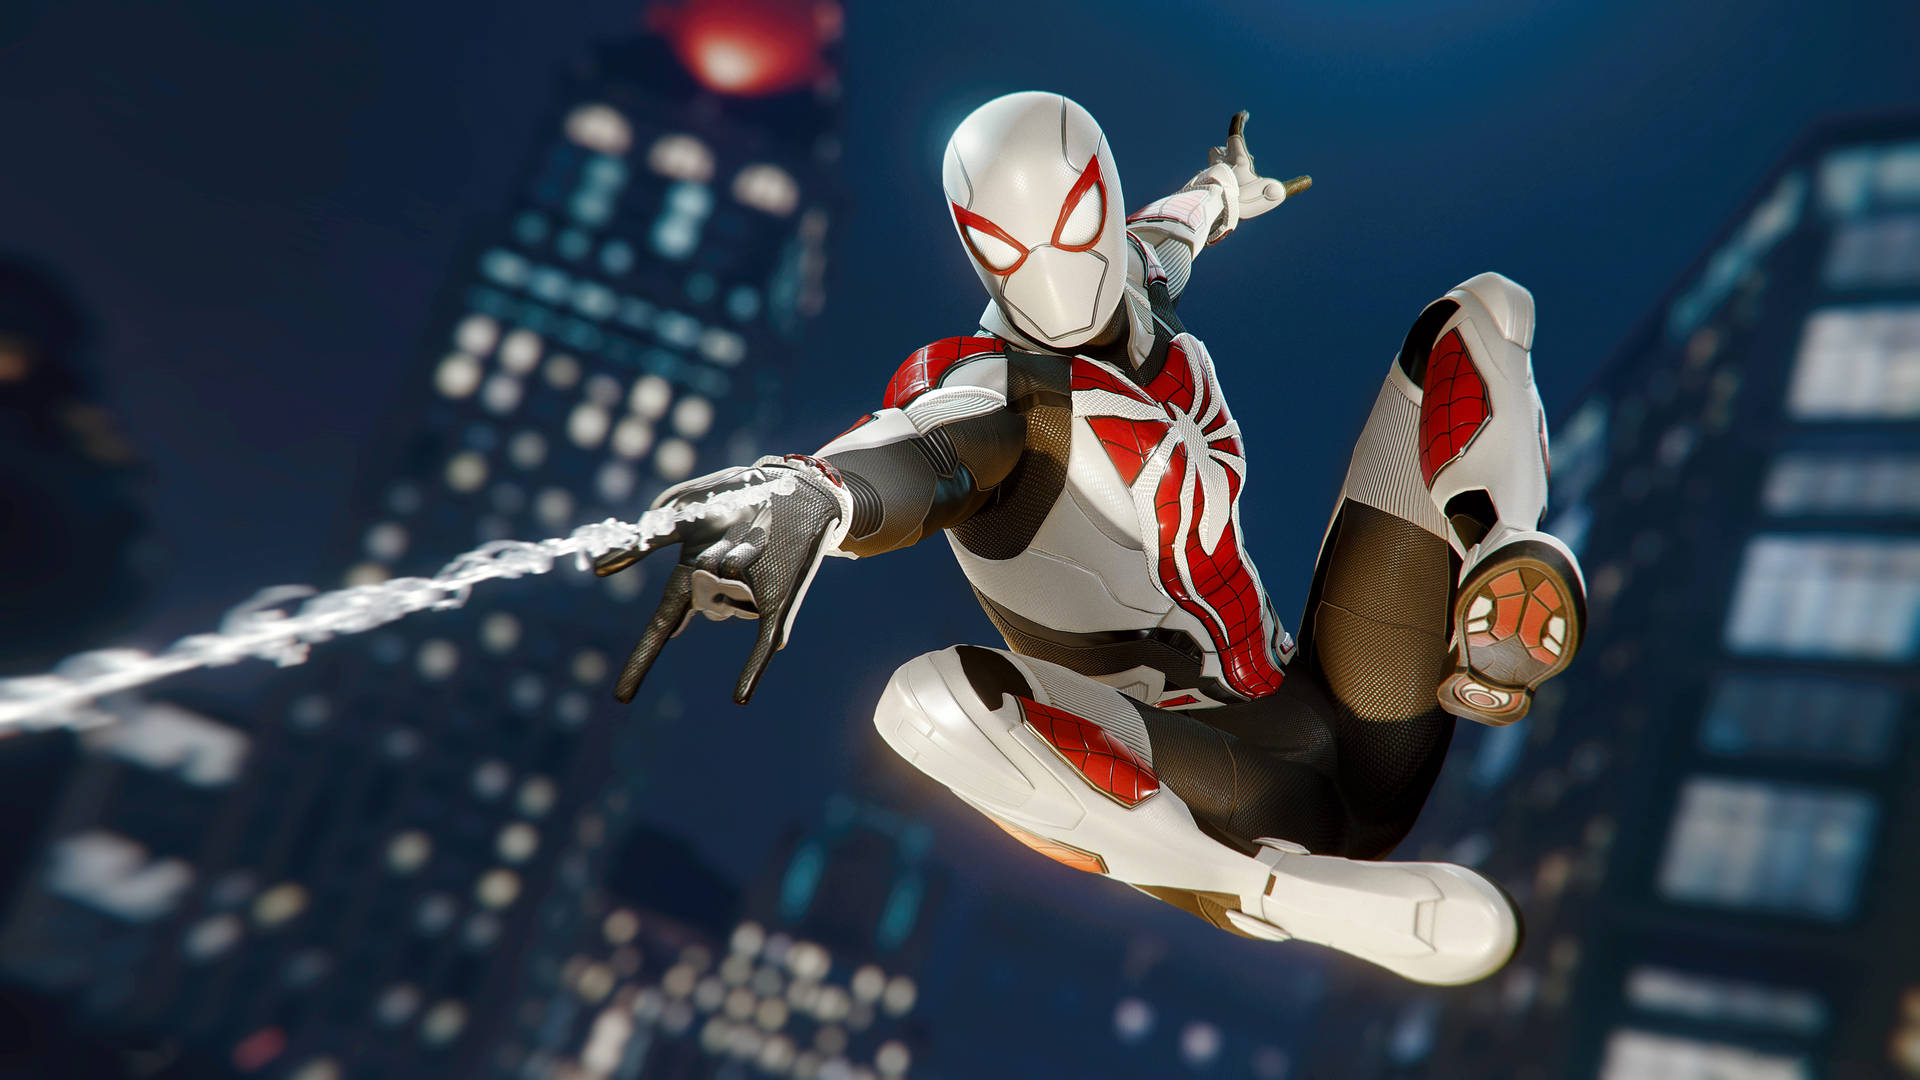 Spider Man Miles Morales Ps5 Pictures Wallpaper